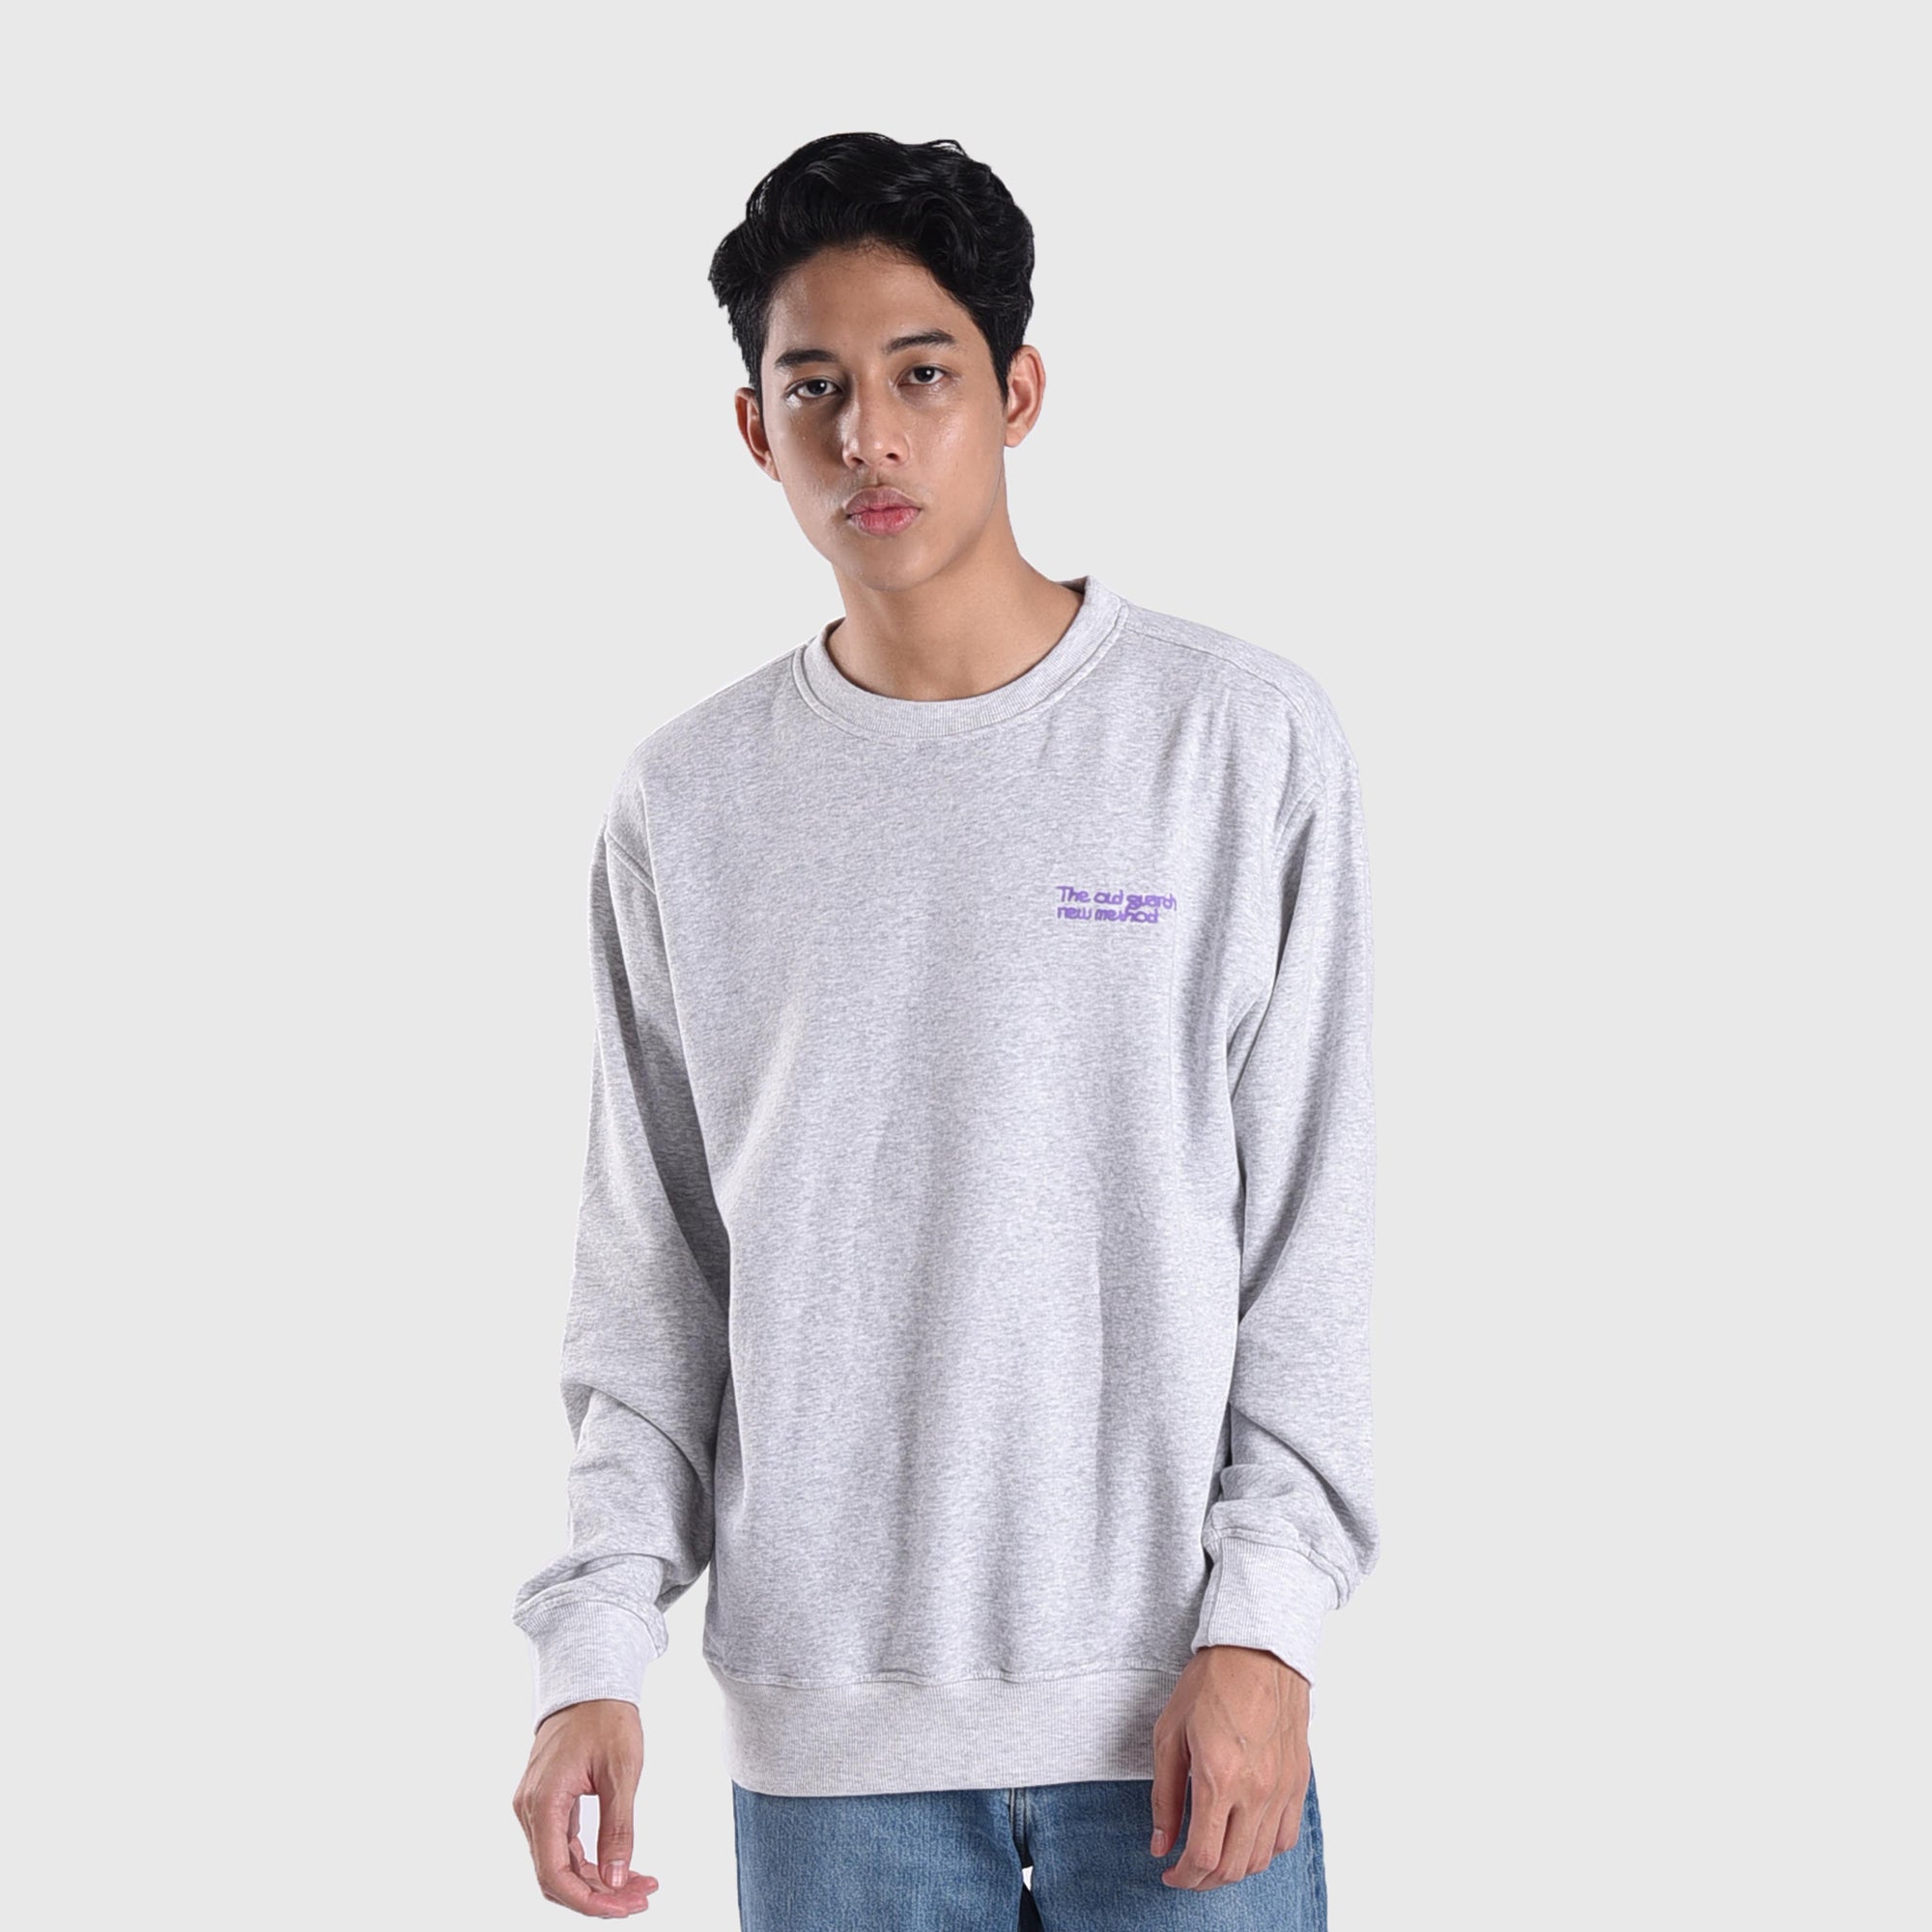 SS508 Misty Grey The Old Guards Crewneck